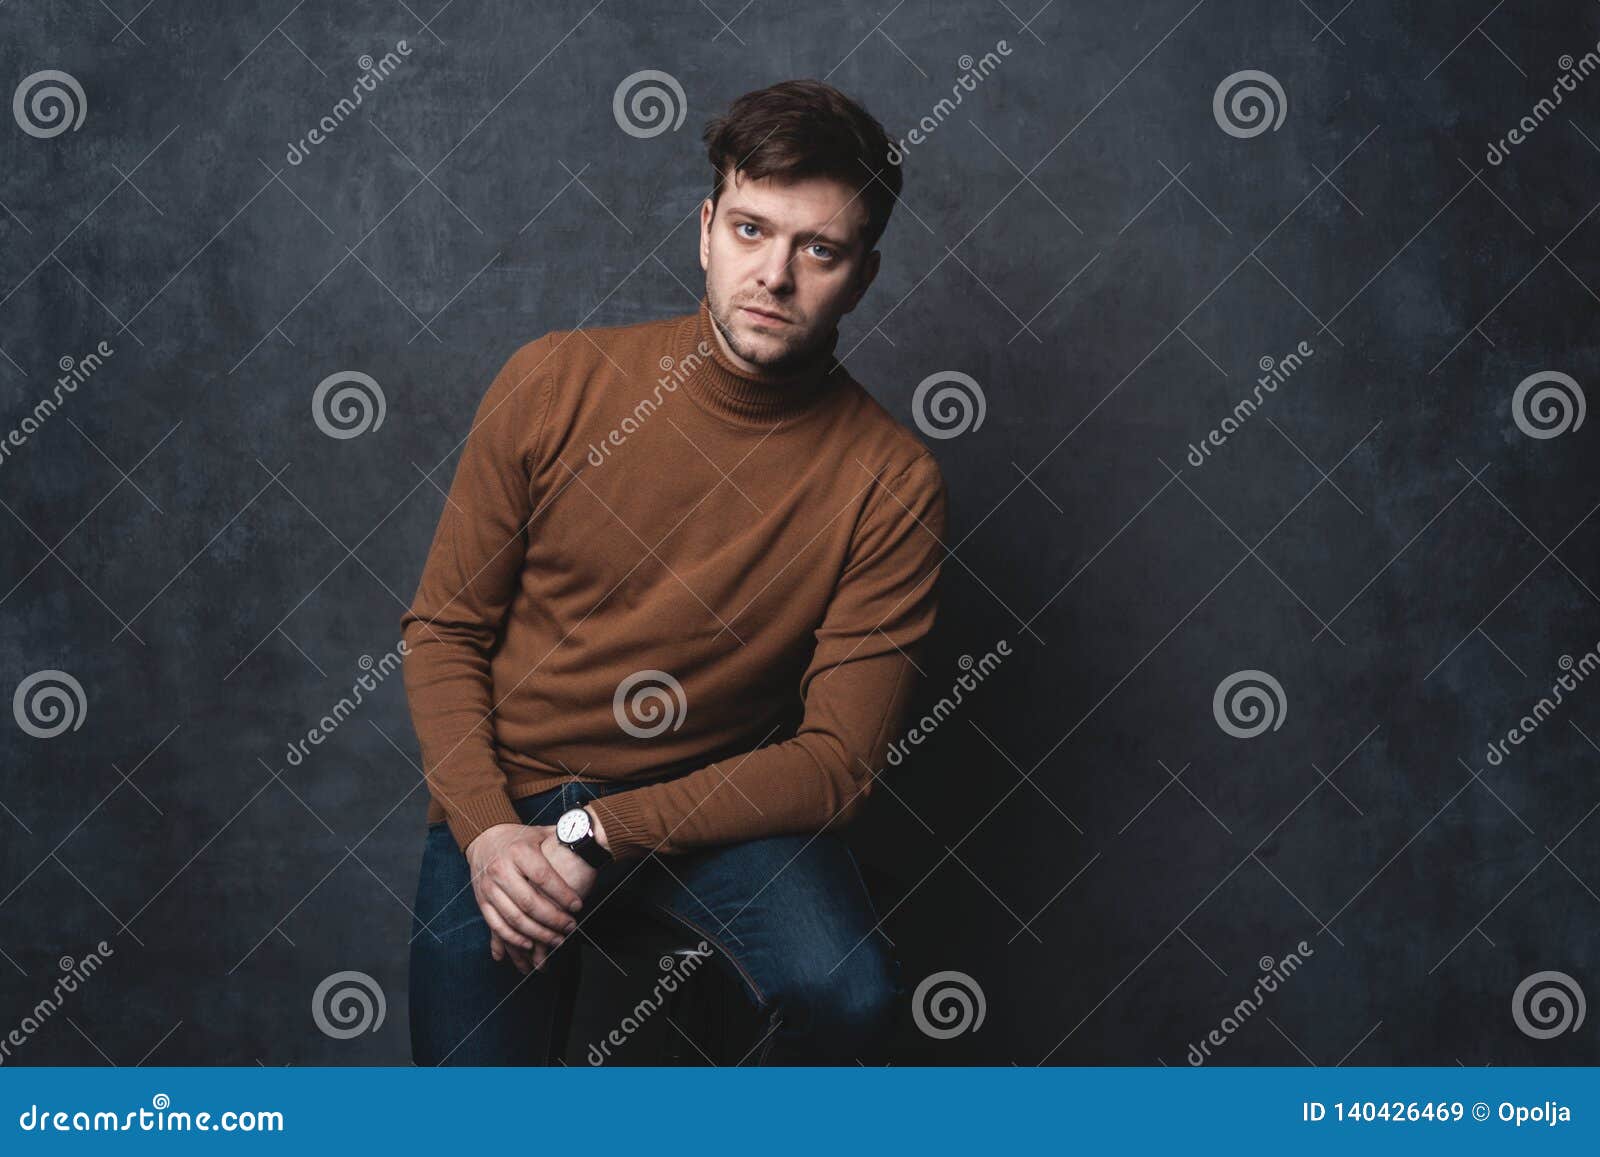 Handsome Casual Man Sits on Chair Near a Dark Gray Wall and Looks To ...